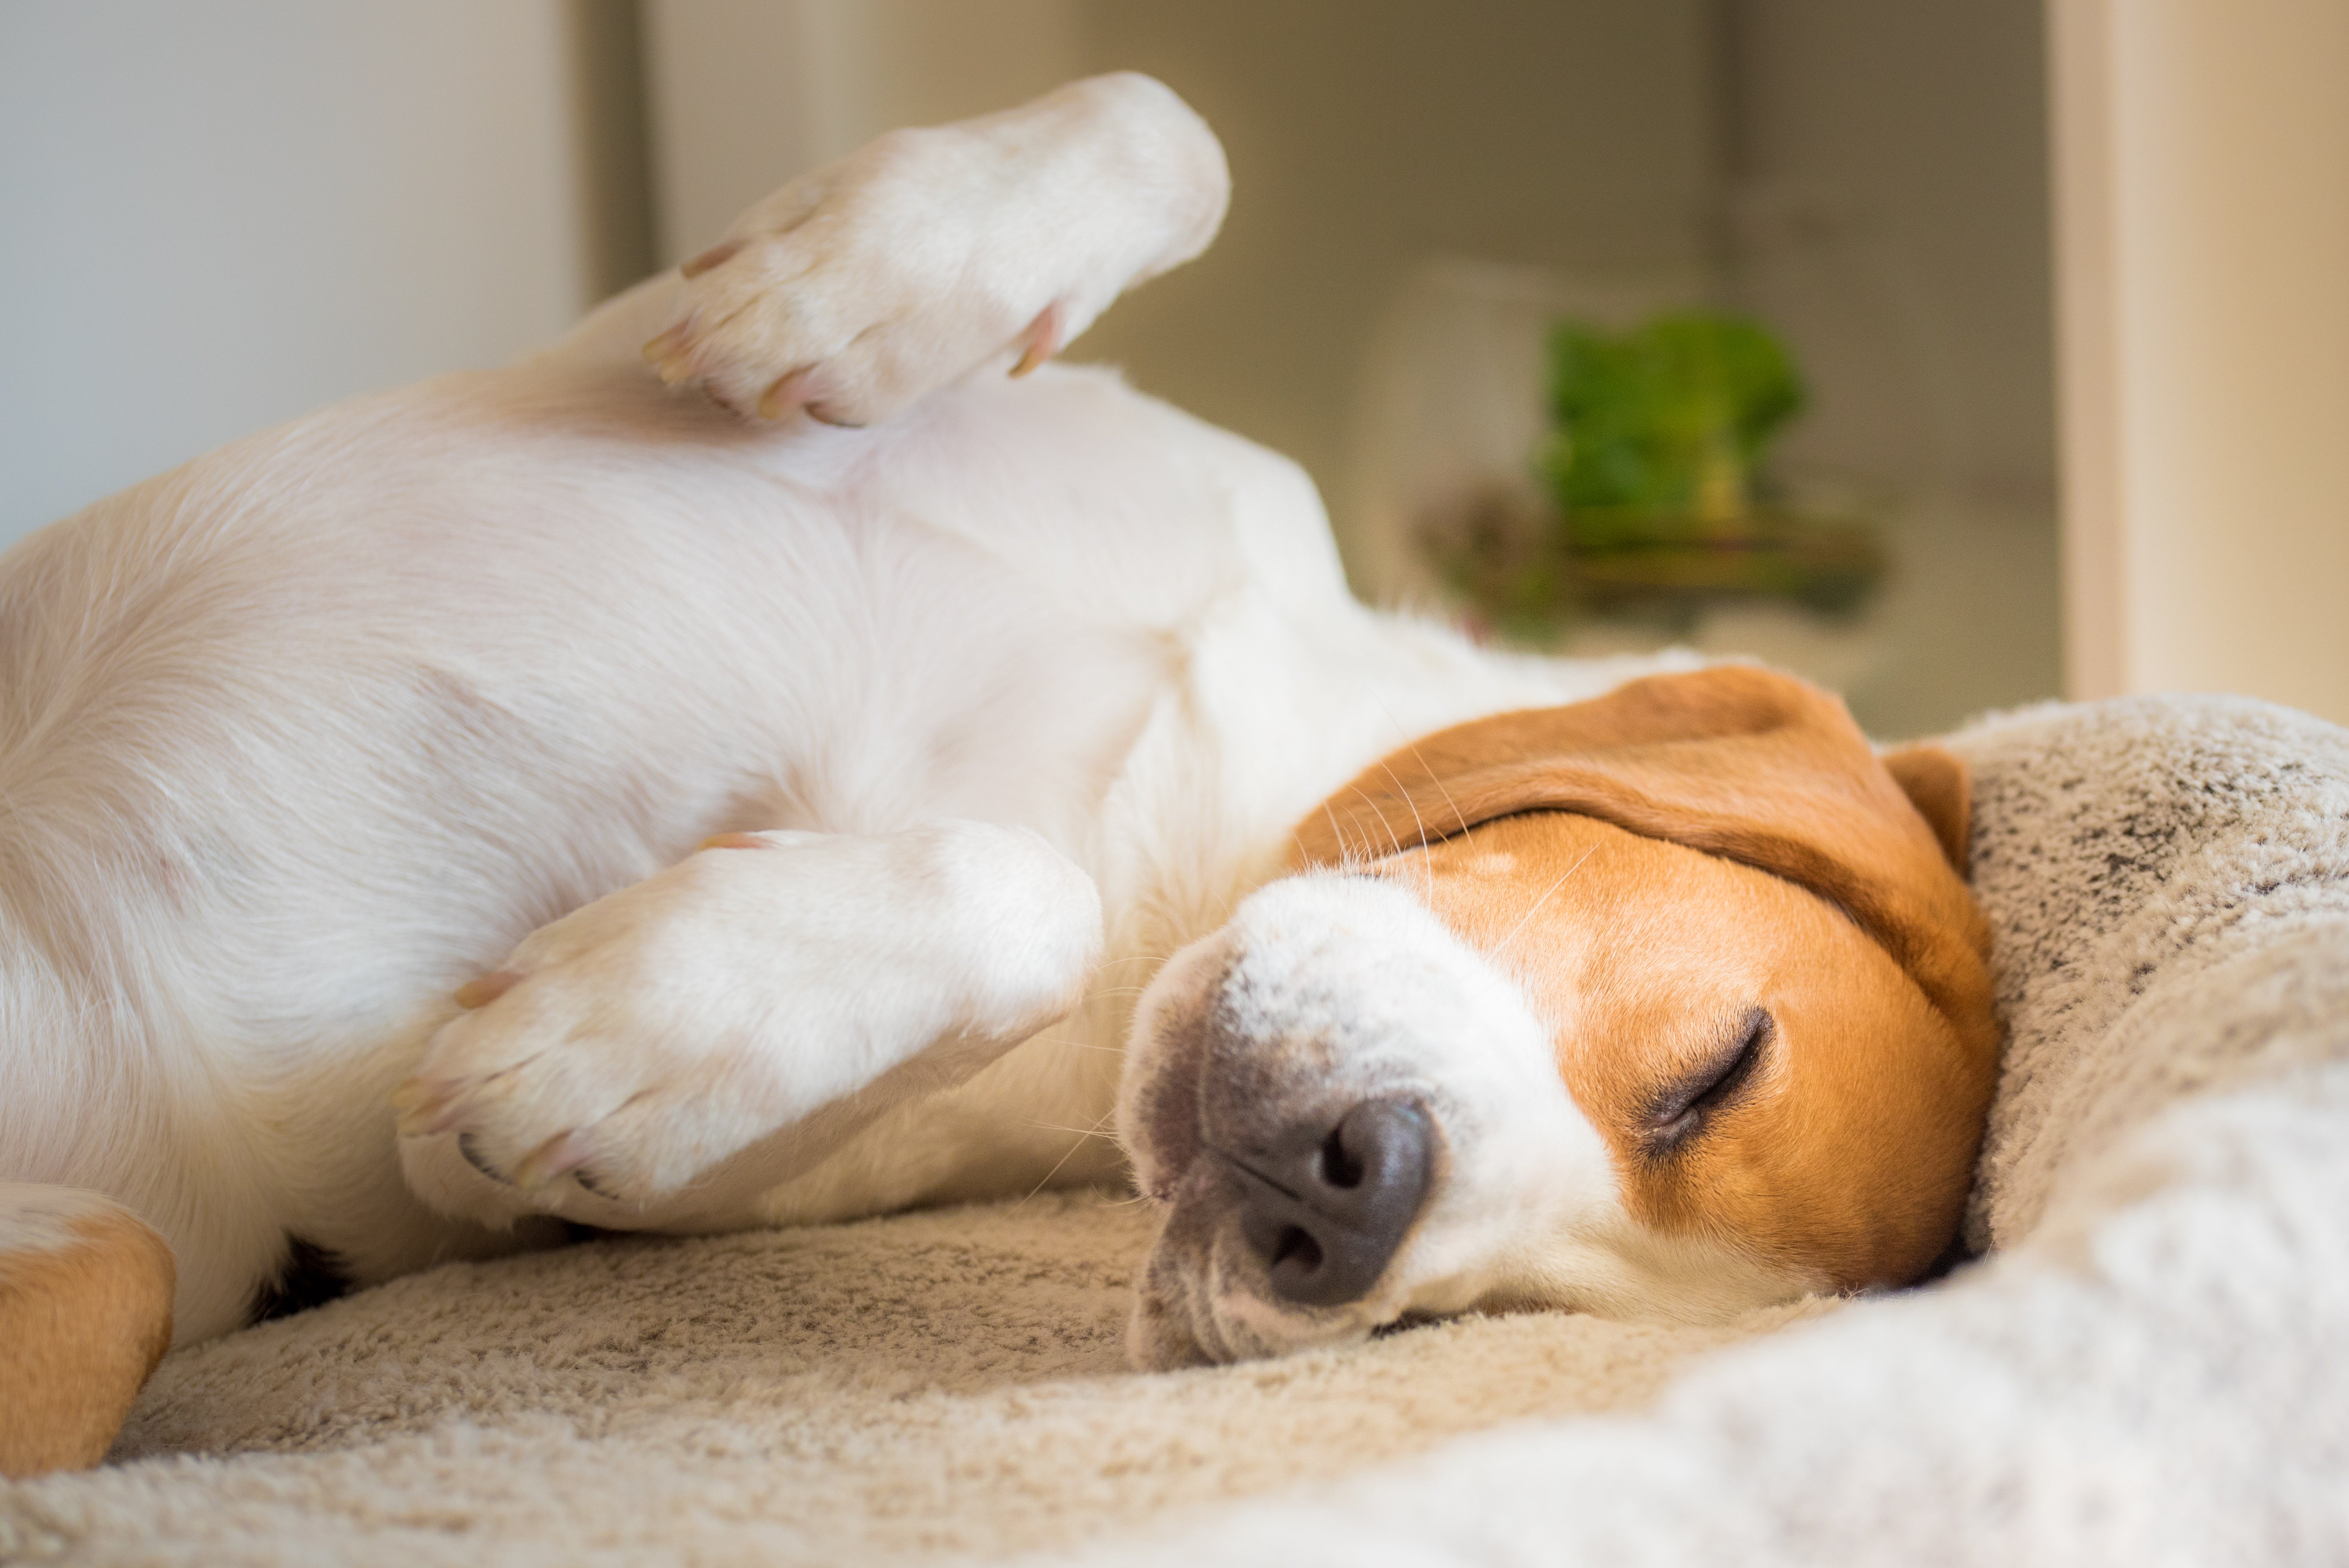 Beagle dog sleeping with paws up dreaming and sleeping